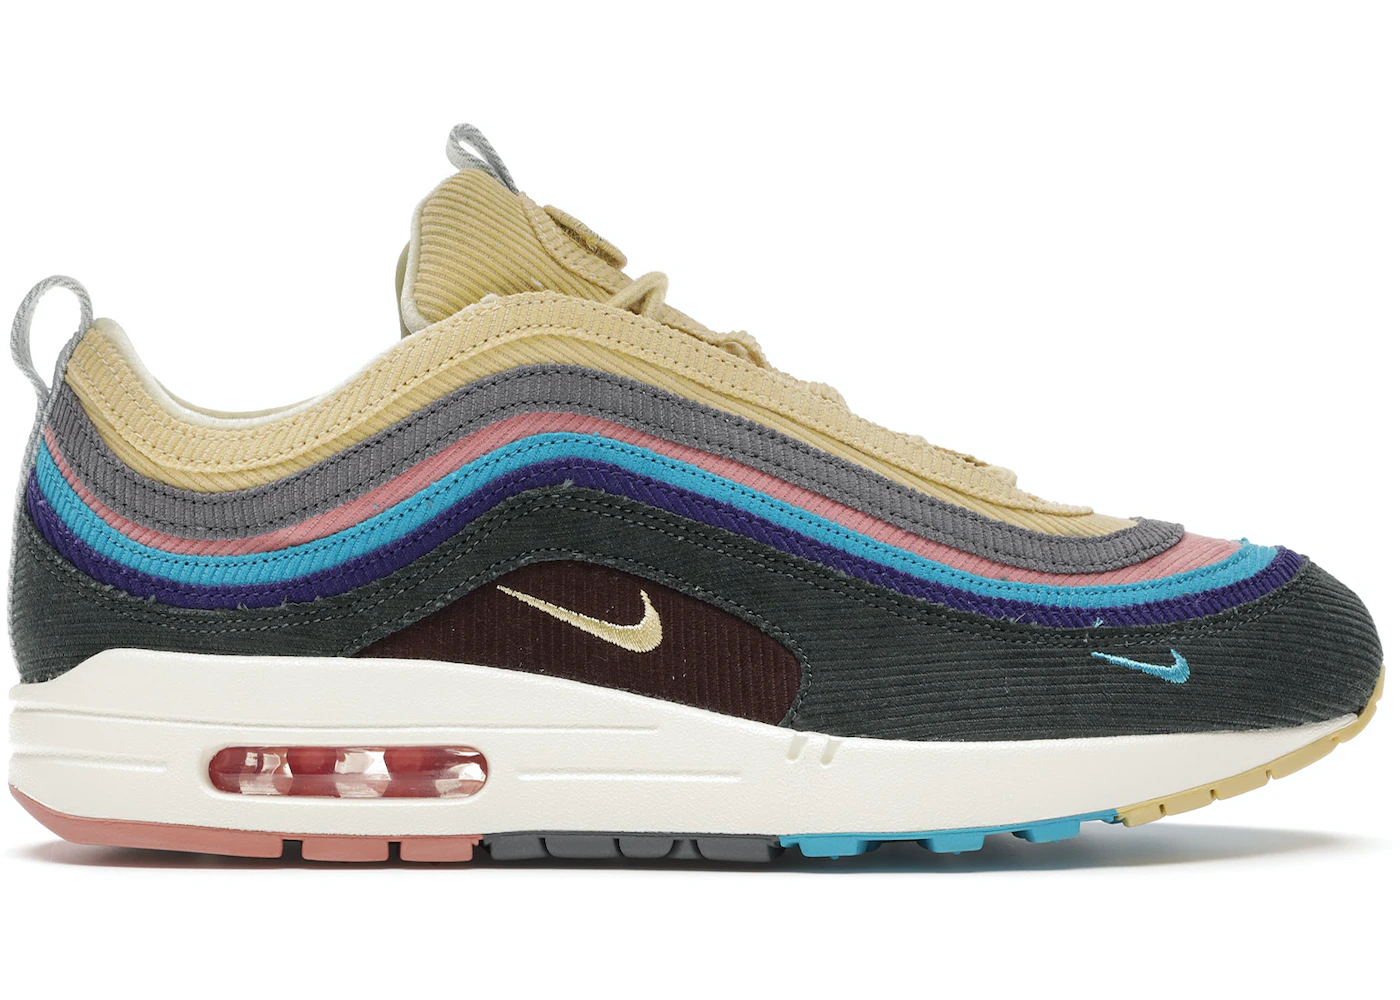 abajo Pulido ingeniero Nike Air Max 1/97 Sean Wotherspoon (All Accessories and Dustbag) -  AJ4219-400 - ES